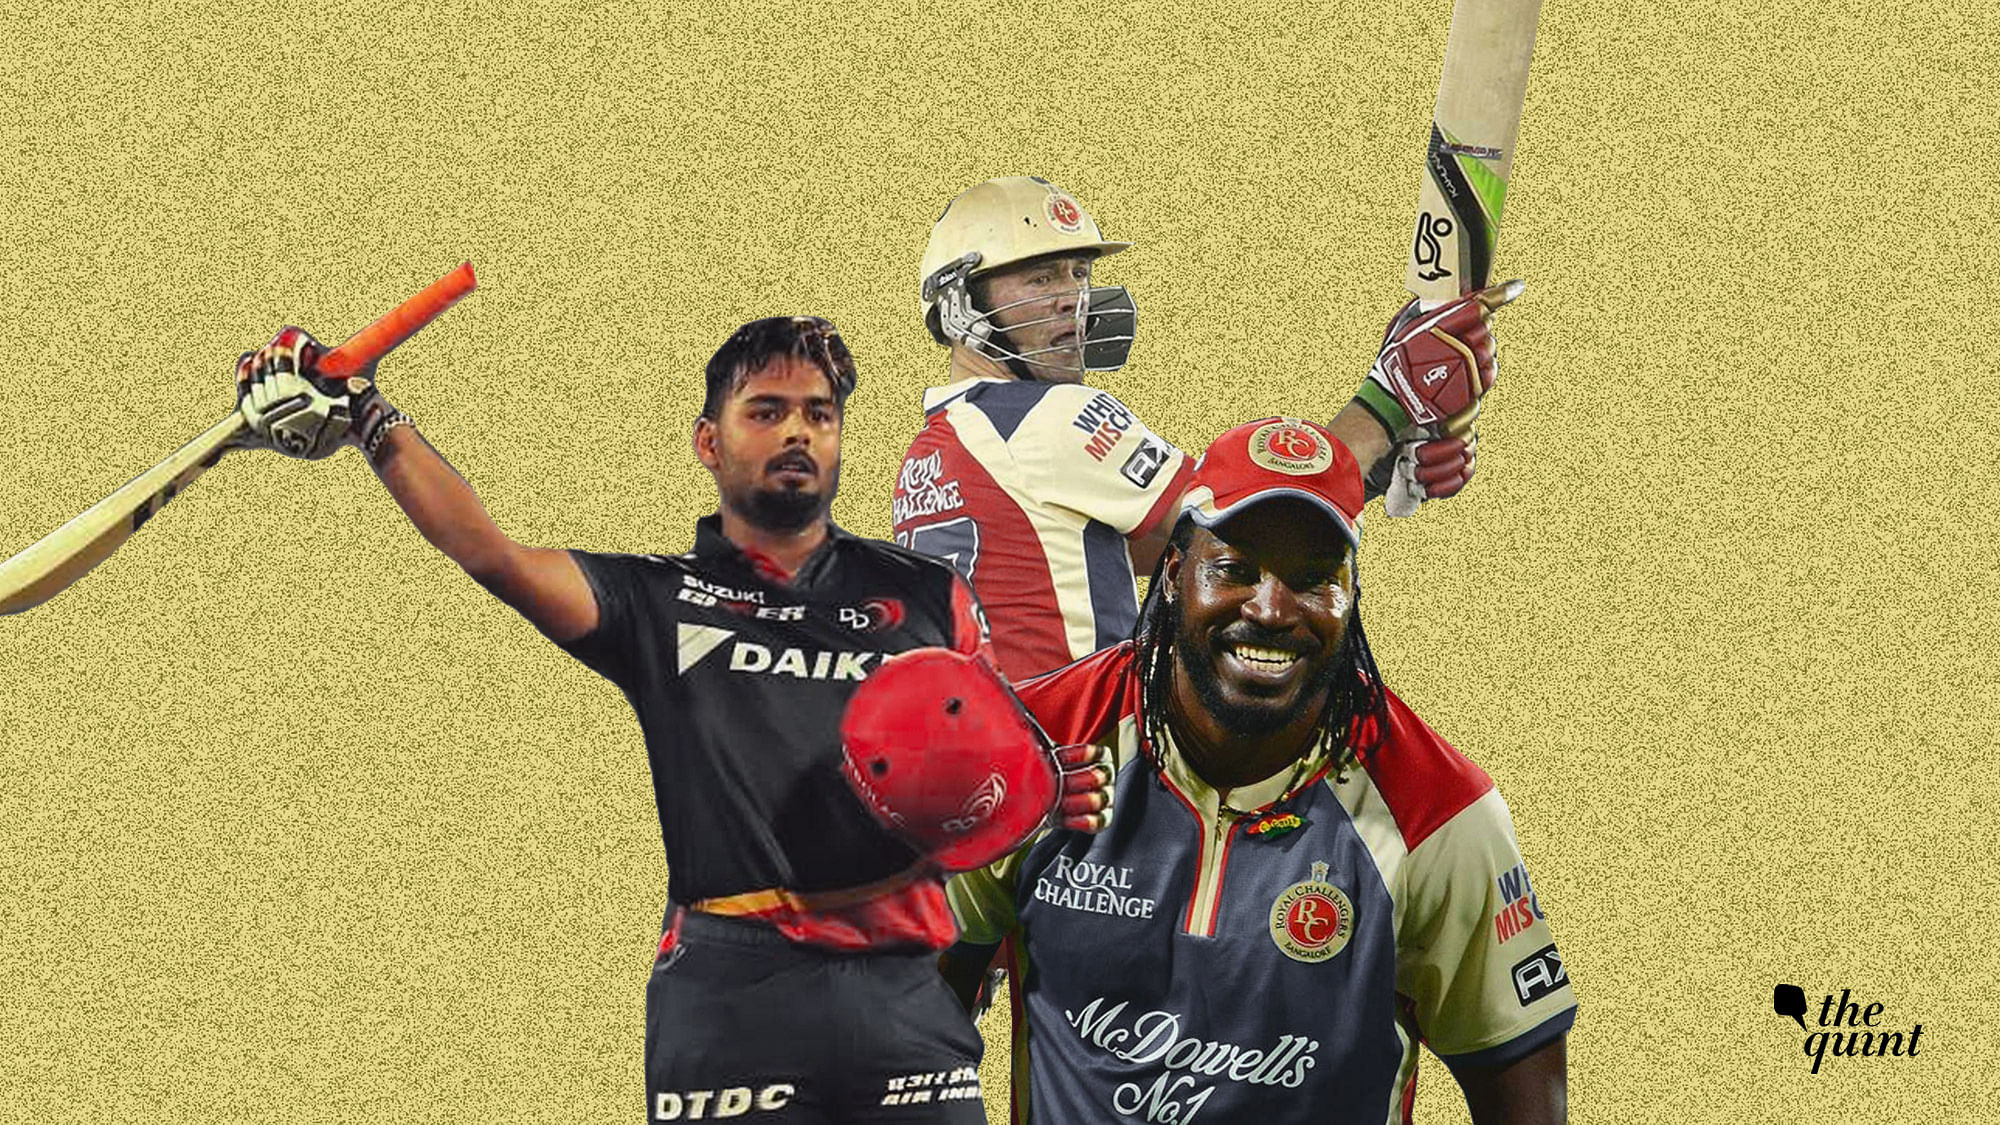 Chris Gayle, AB de Villiers and Rishabh Pant are among the cricketers with the highest scores in IPL.